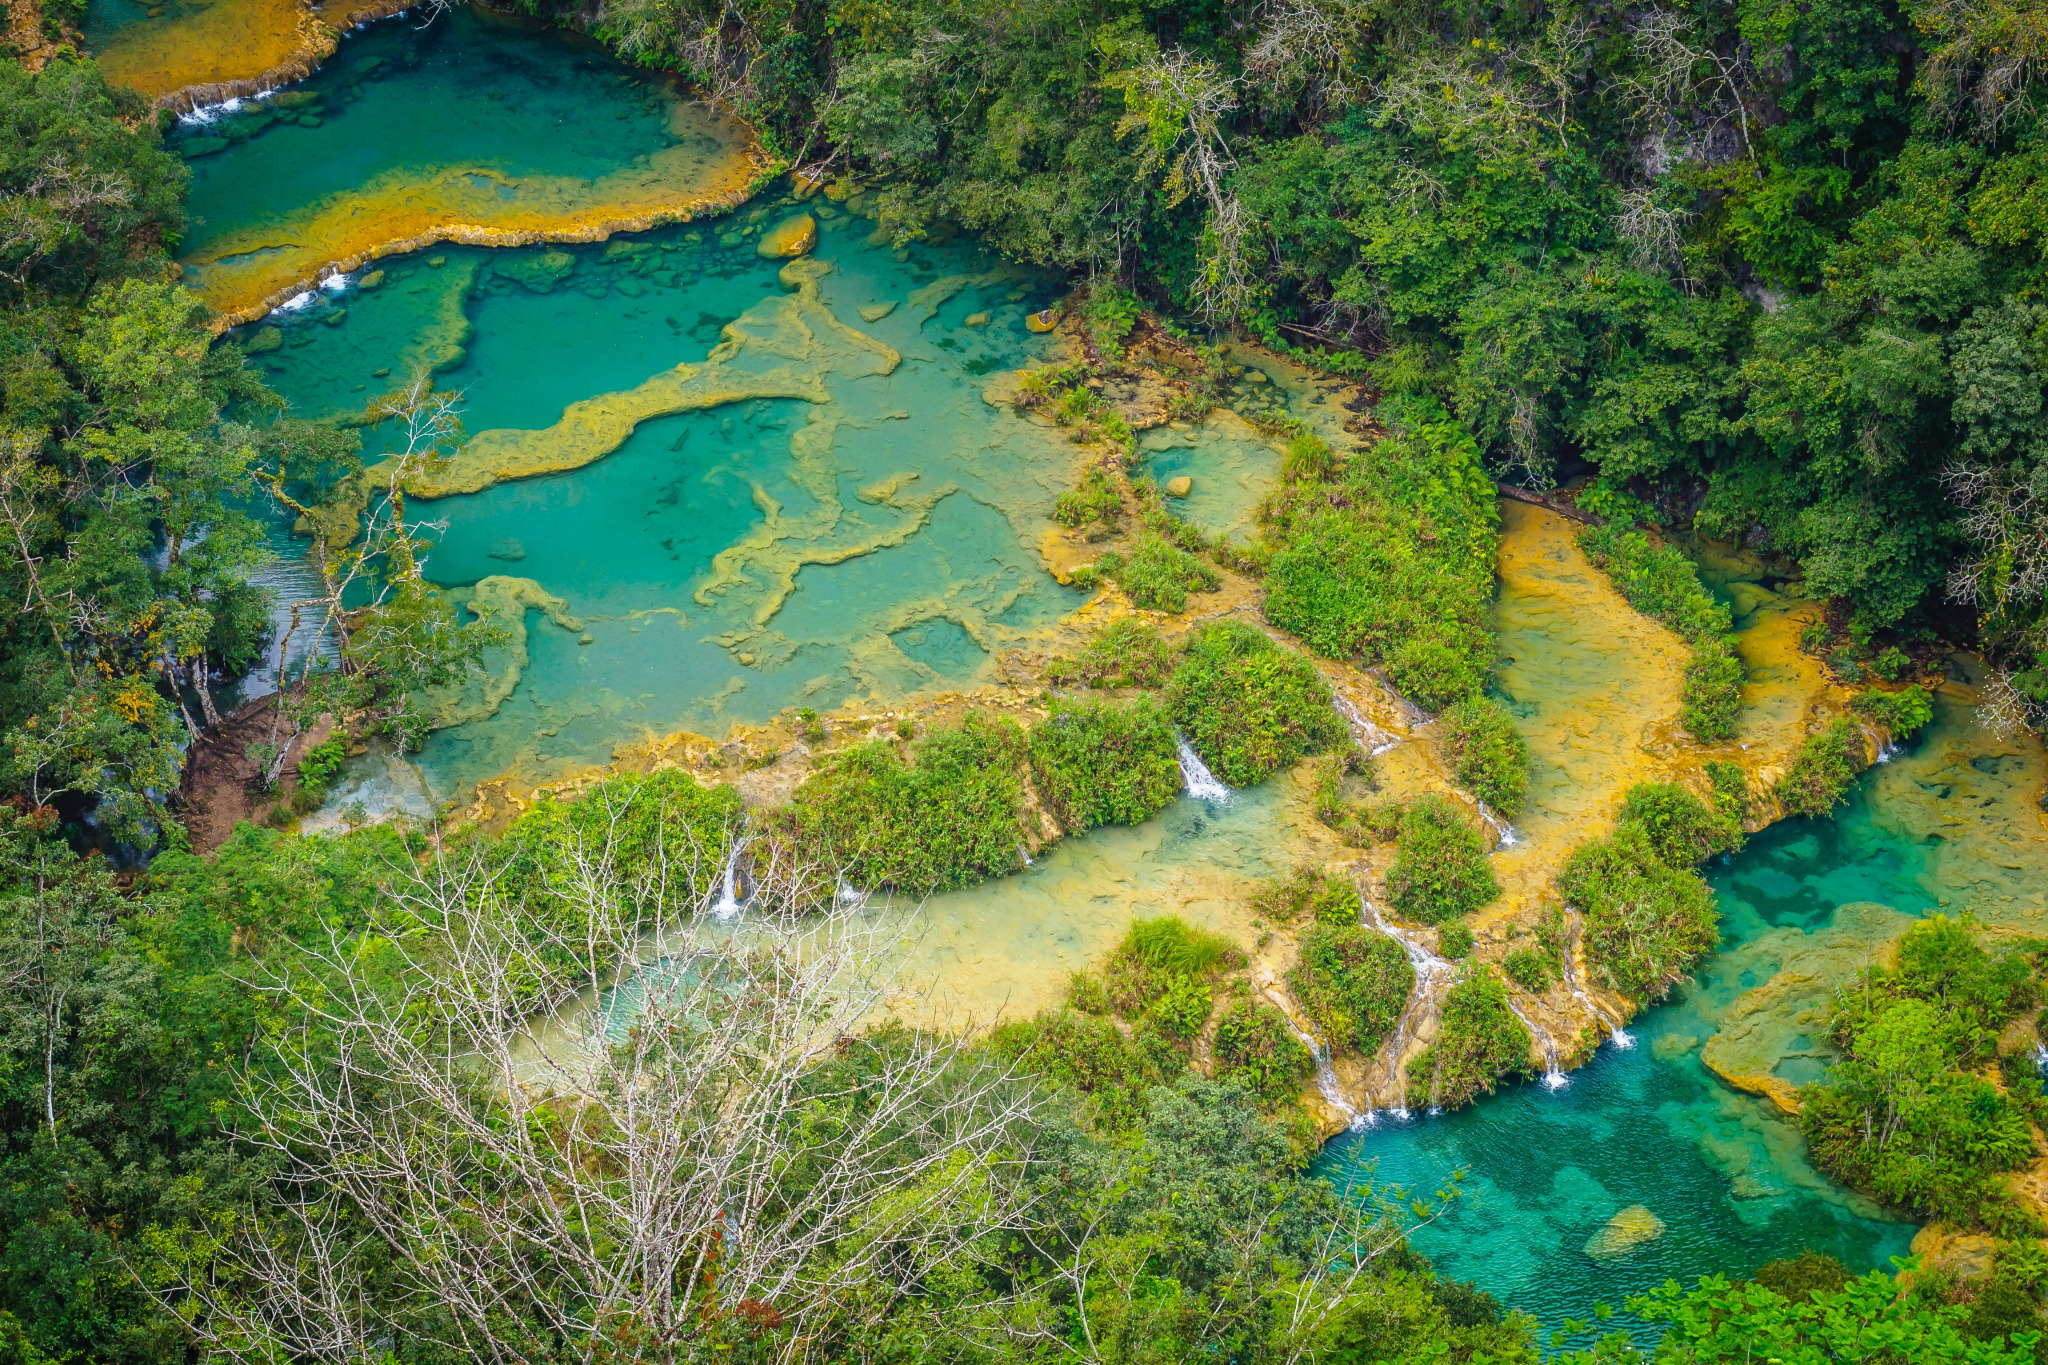 Best guide for visiting Semuc Champey in Guatemala